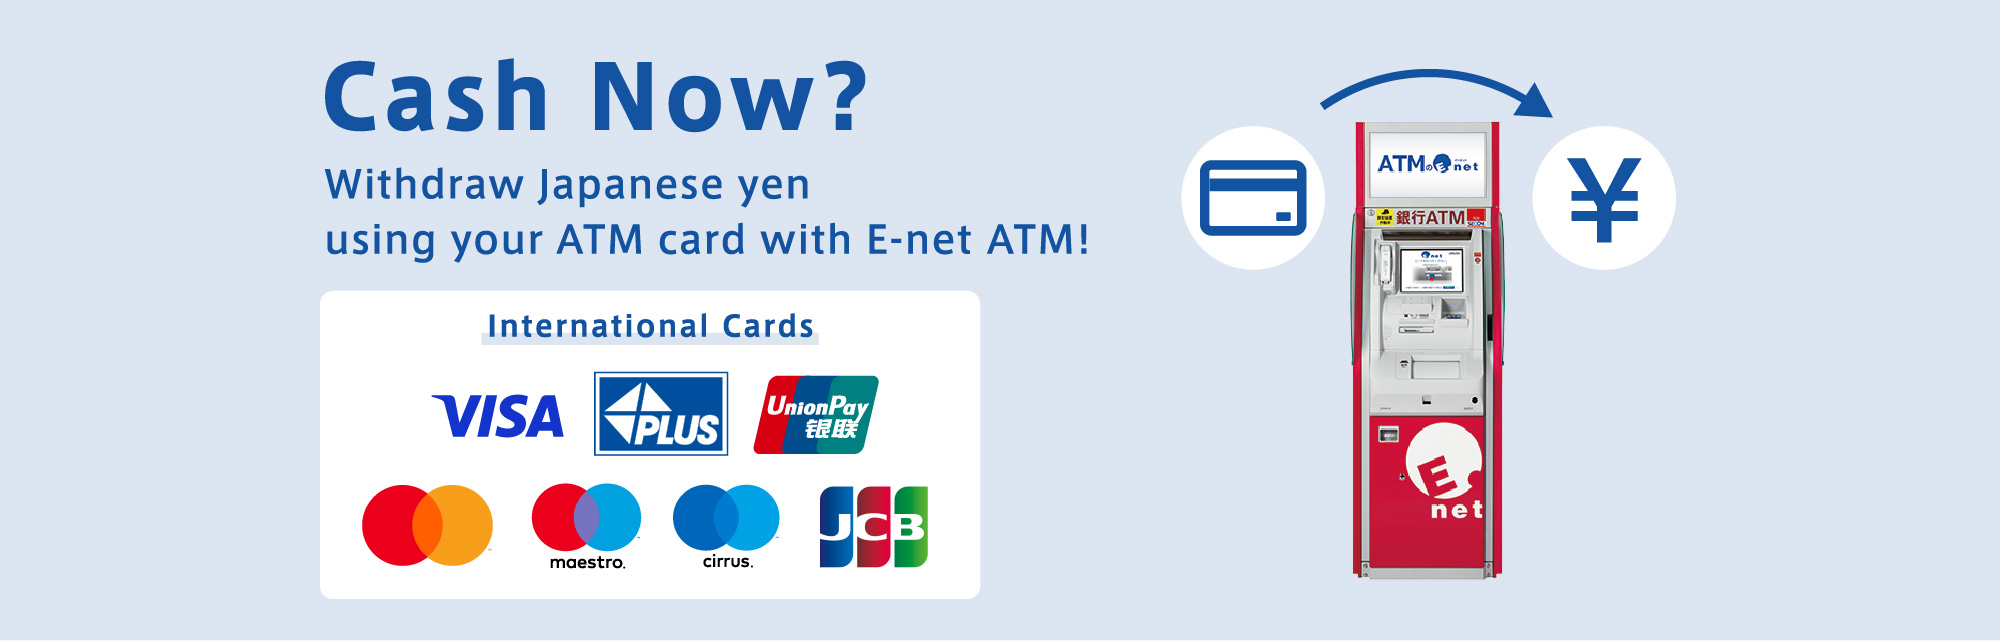 Cash Now? Withdraw Japanese yen using your ATM card with E-net ATM!